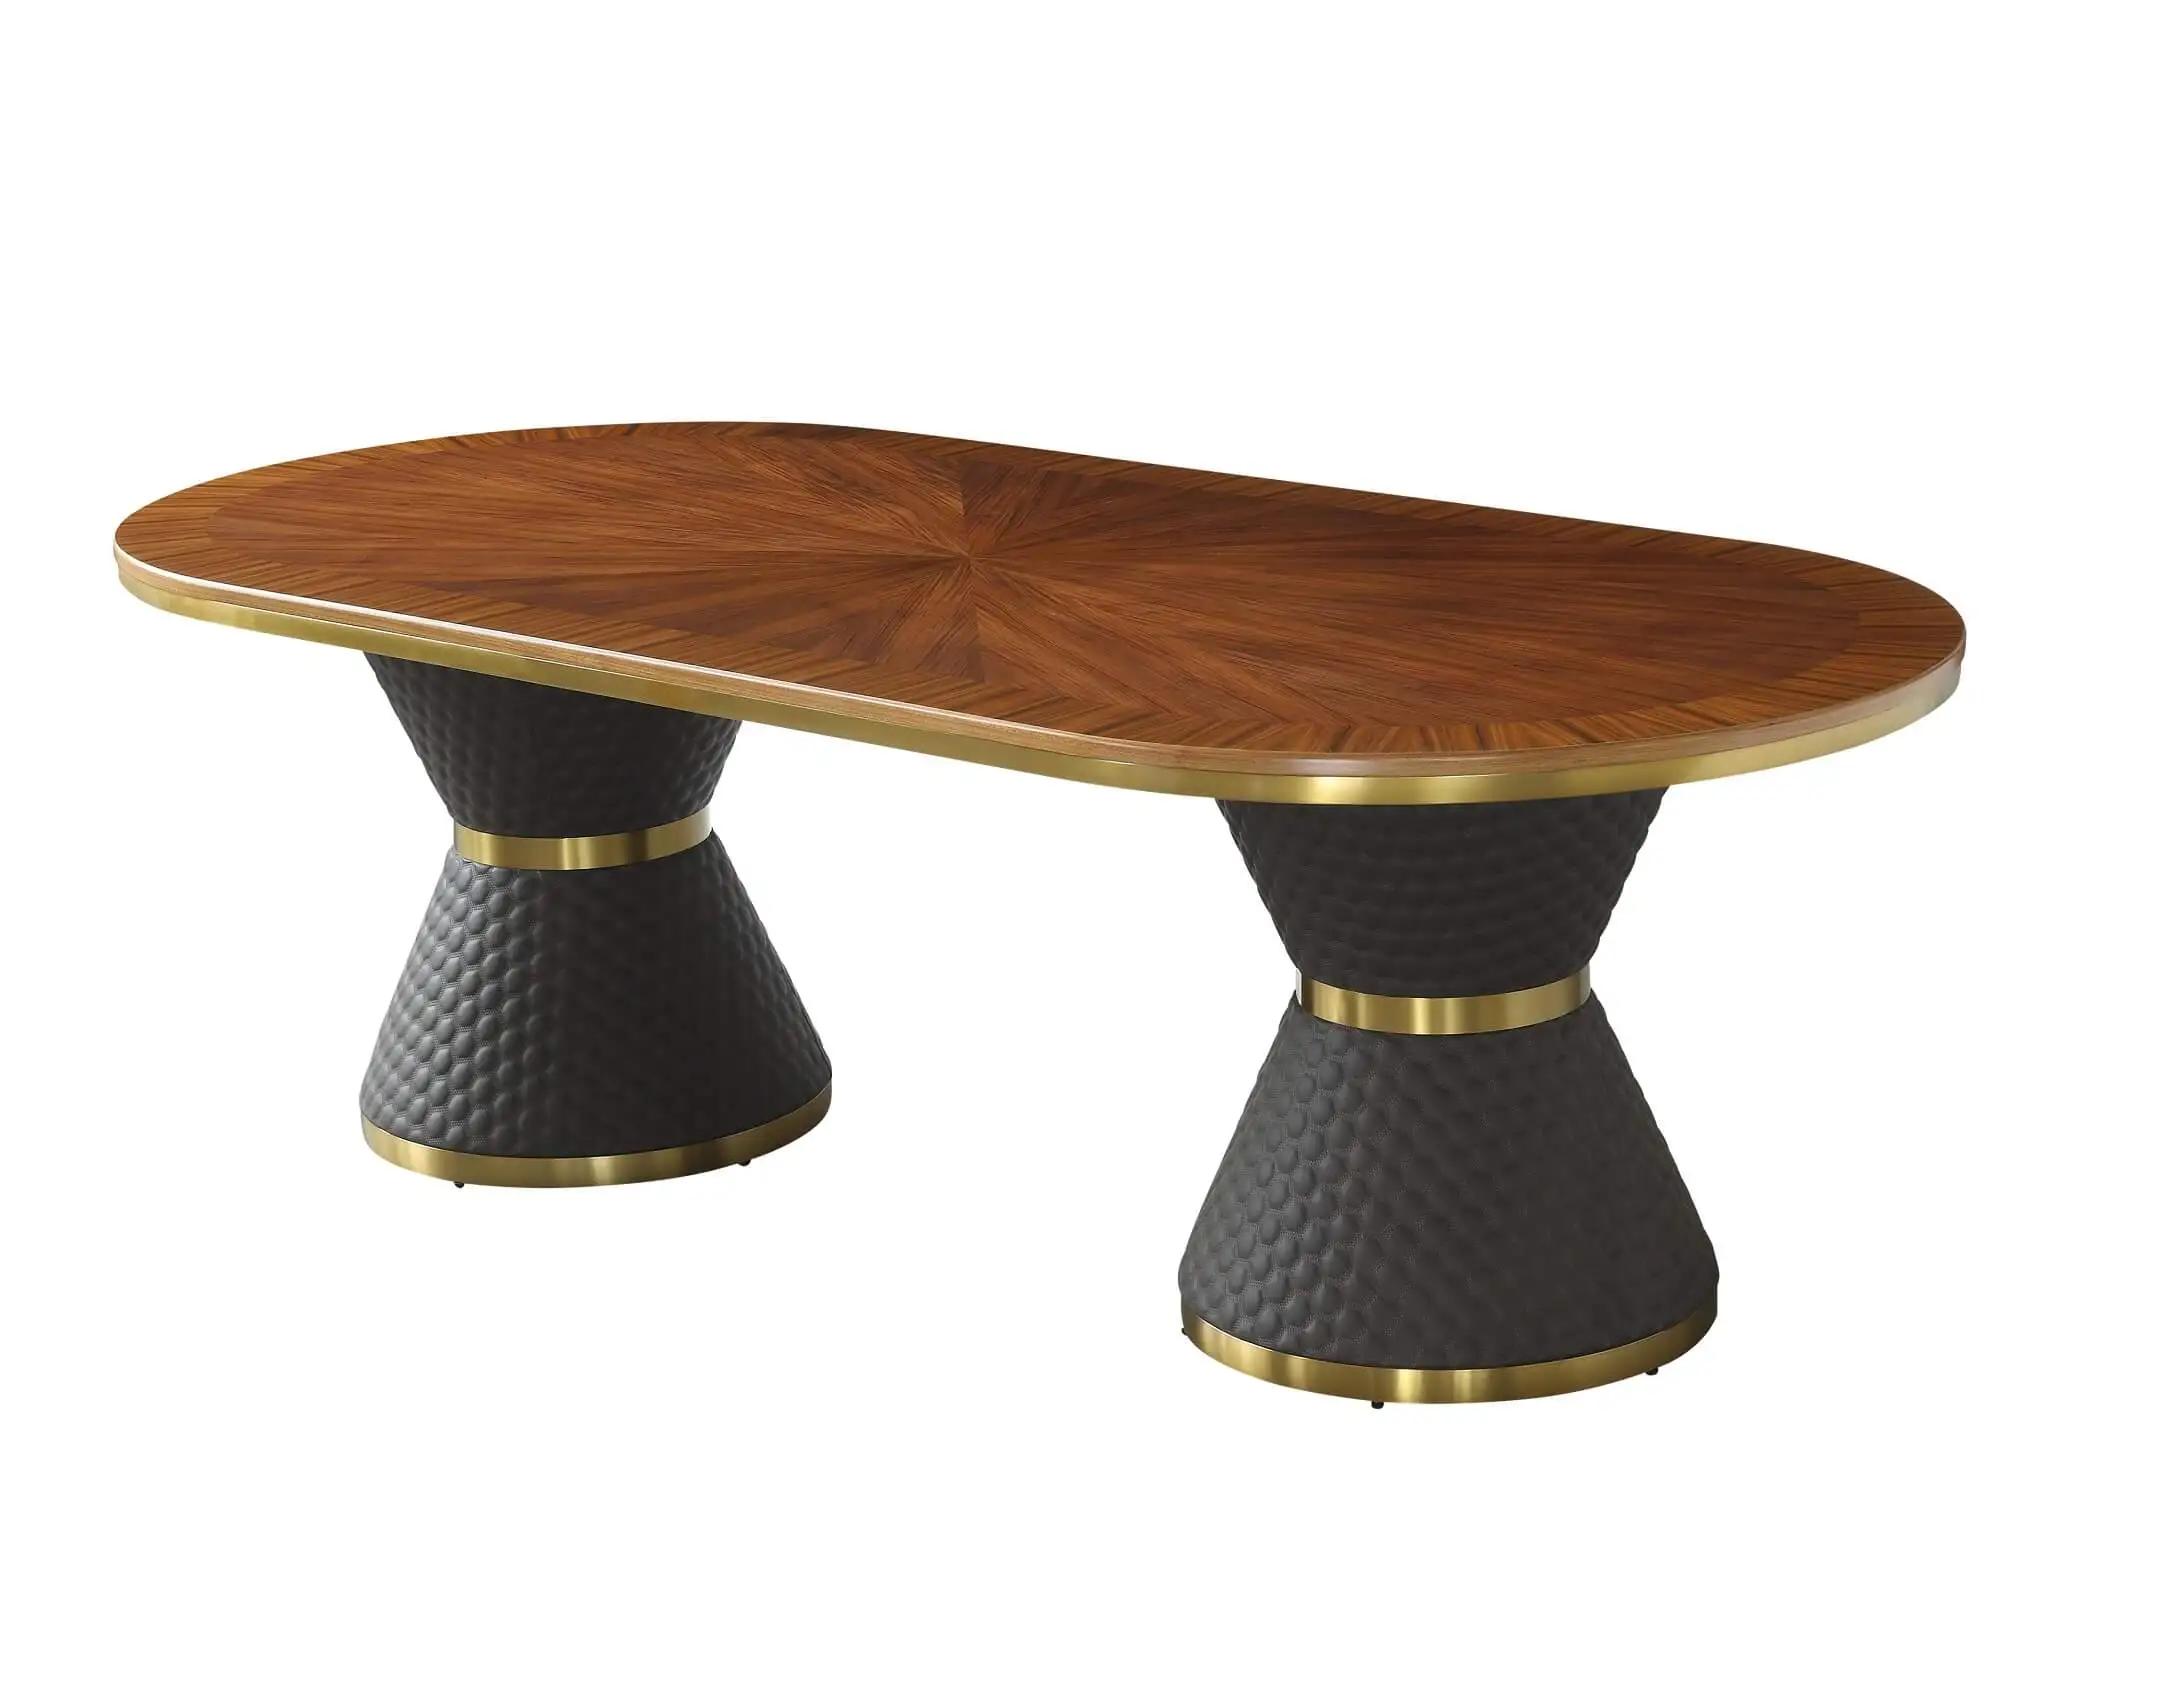 Modern Oval Table VOGUE EF-27995-DT in Gold, Chocolate 